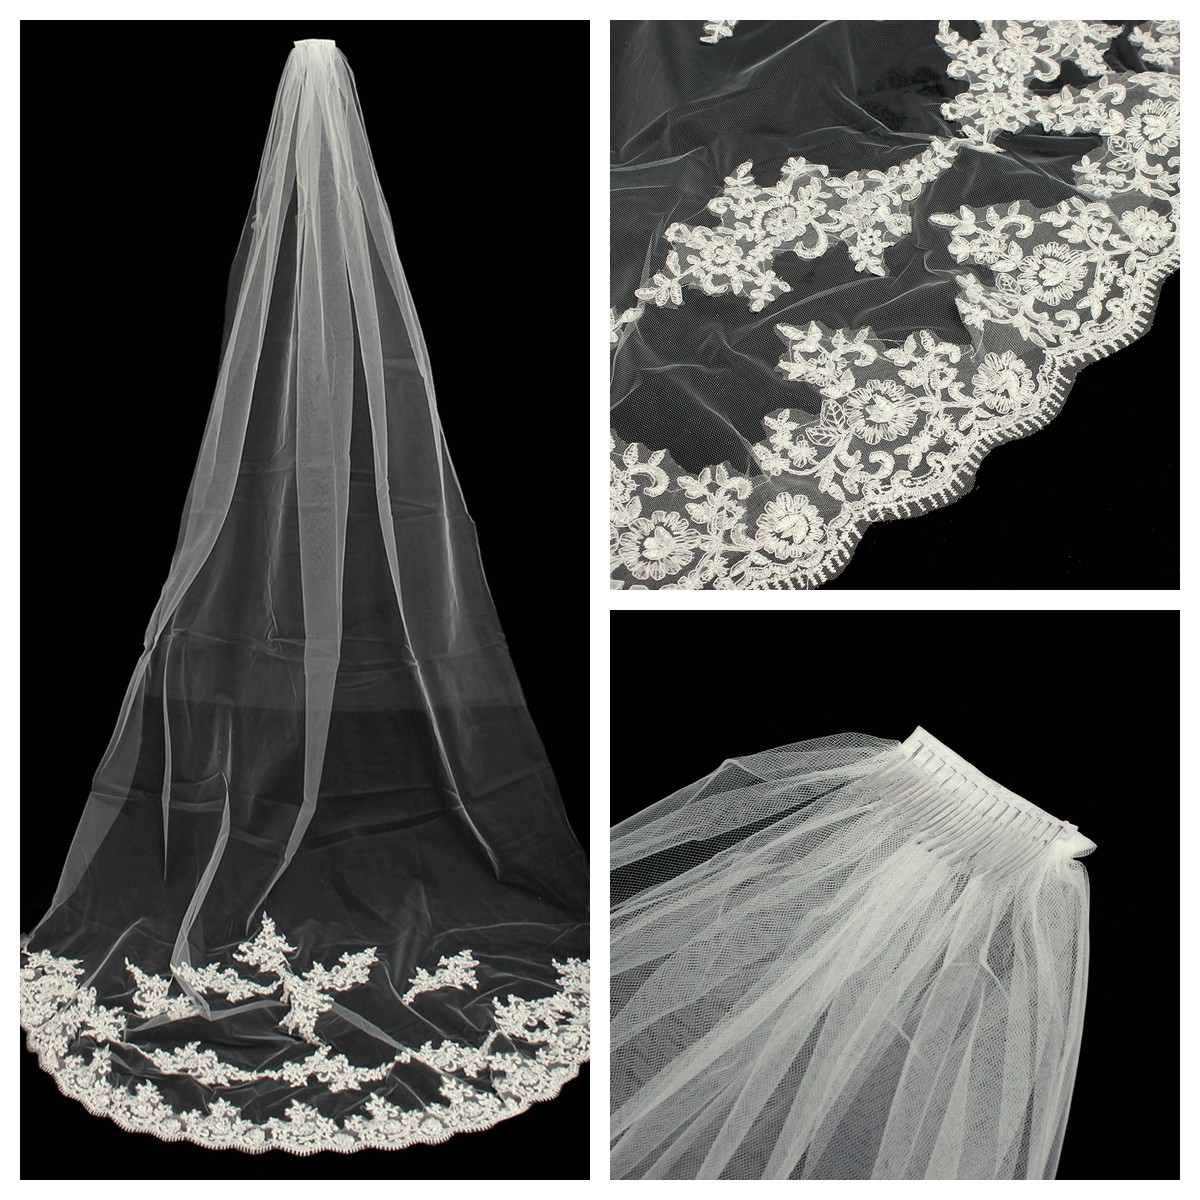 27M-Bride-White-Ivory-Elegant-Cathedral-Length-Wedding-Bridal-Veil-Comb-With-Lace-Edge-1025638